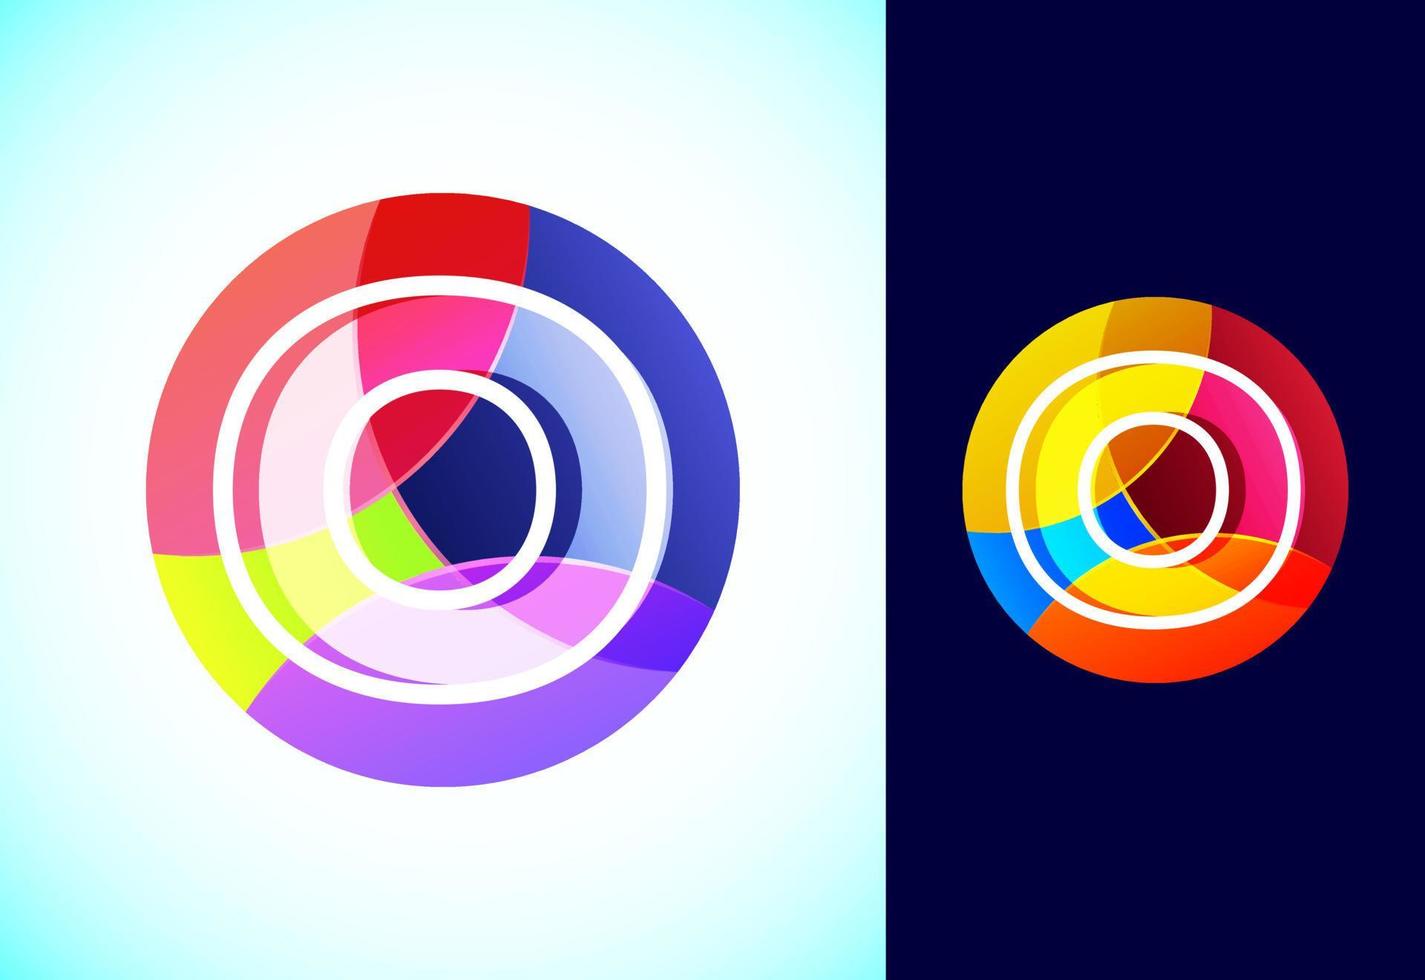 Line letter O on a colorful circle. Graphic alphabet symbol for business or company identity. vector